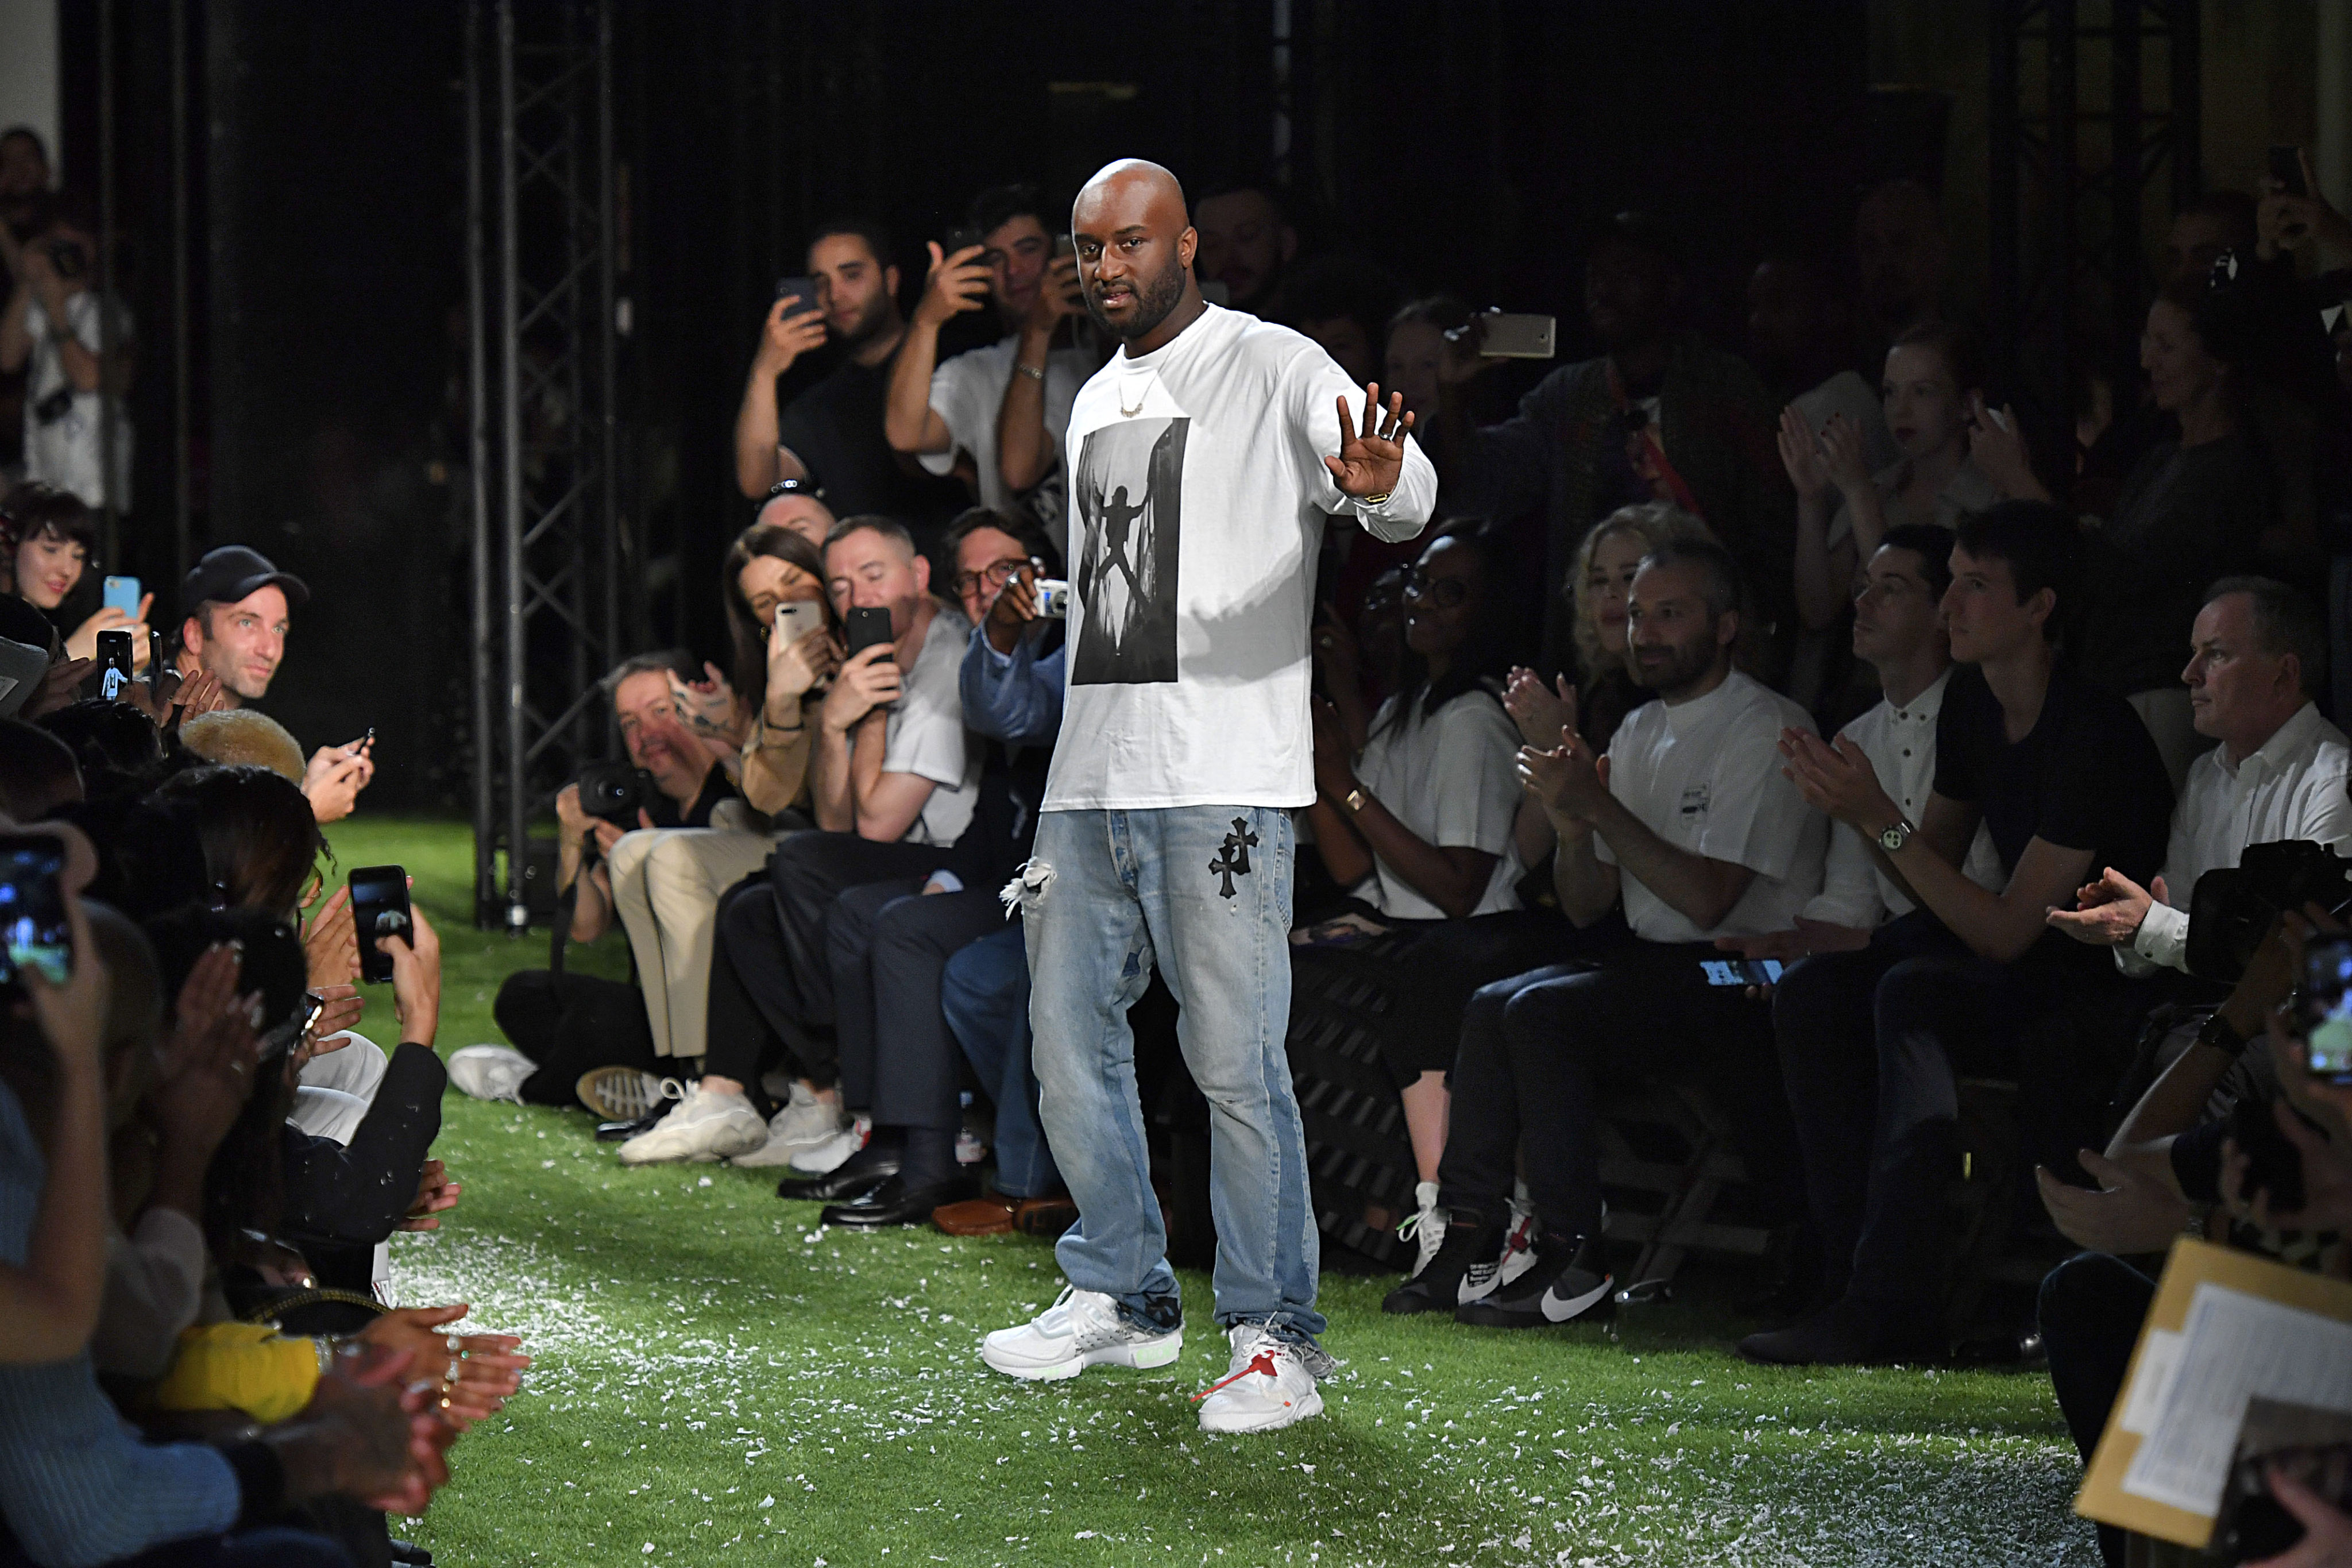 Virgil Abloh Tells Louis Vuitton's Story of Fashion - The New York